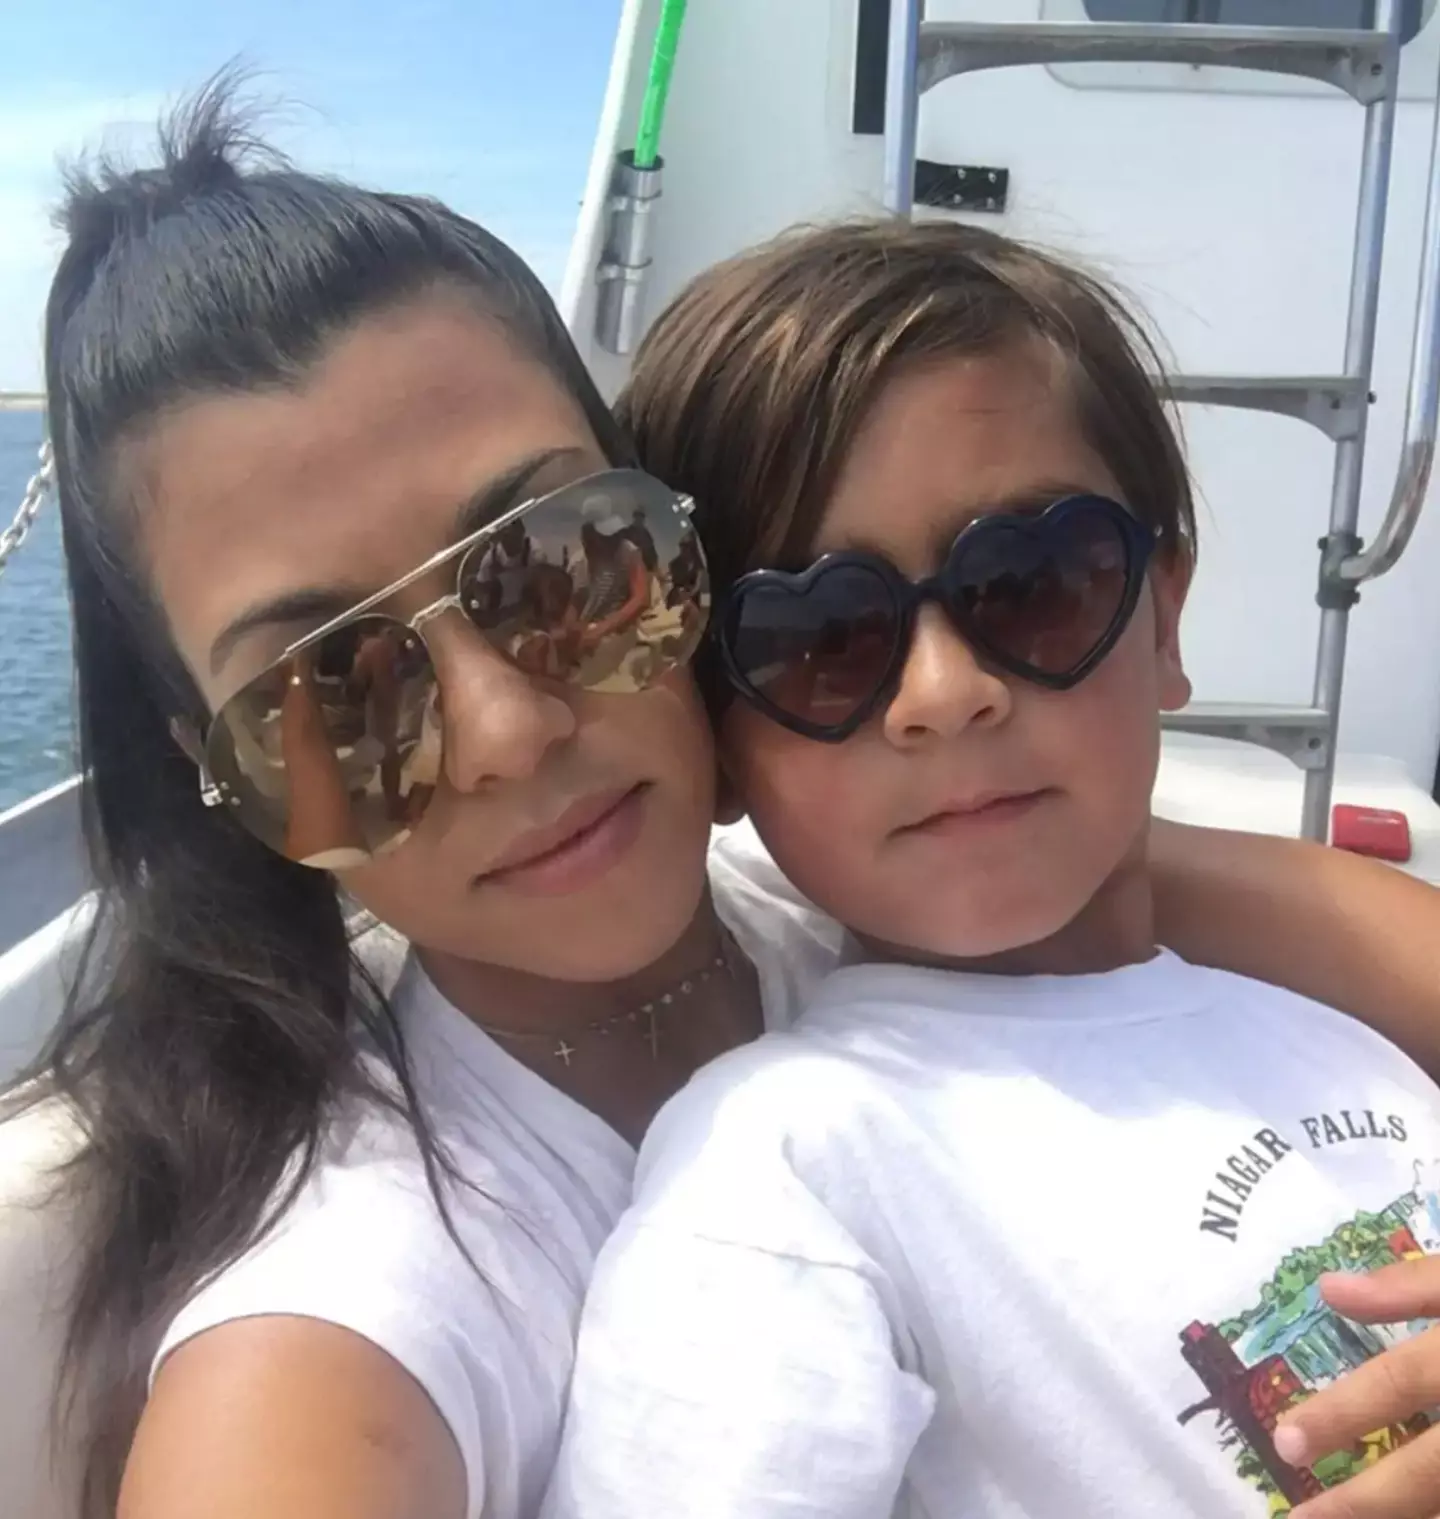 Kourtney has said her son hasn't eaten fries in an entire year.